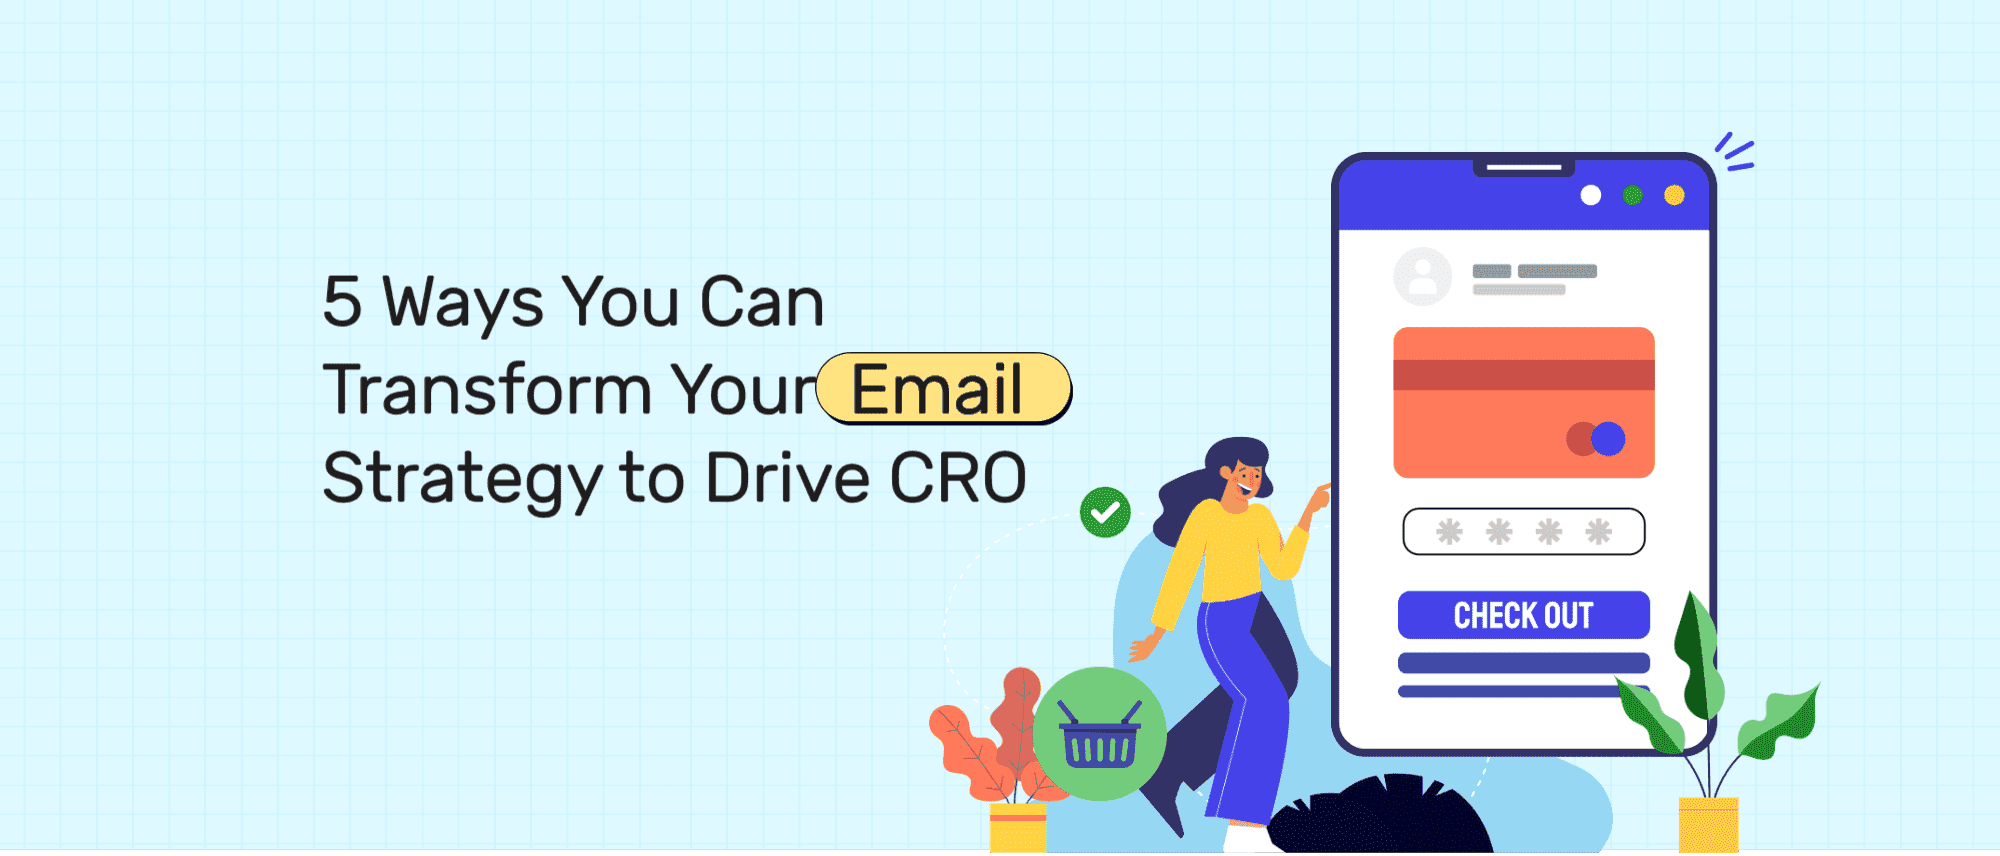 transform-email-strategy-cro